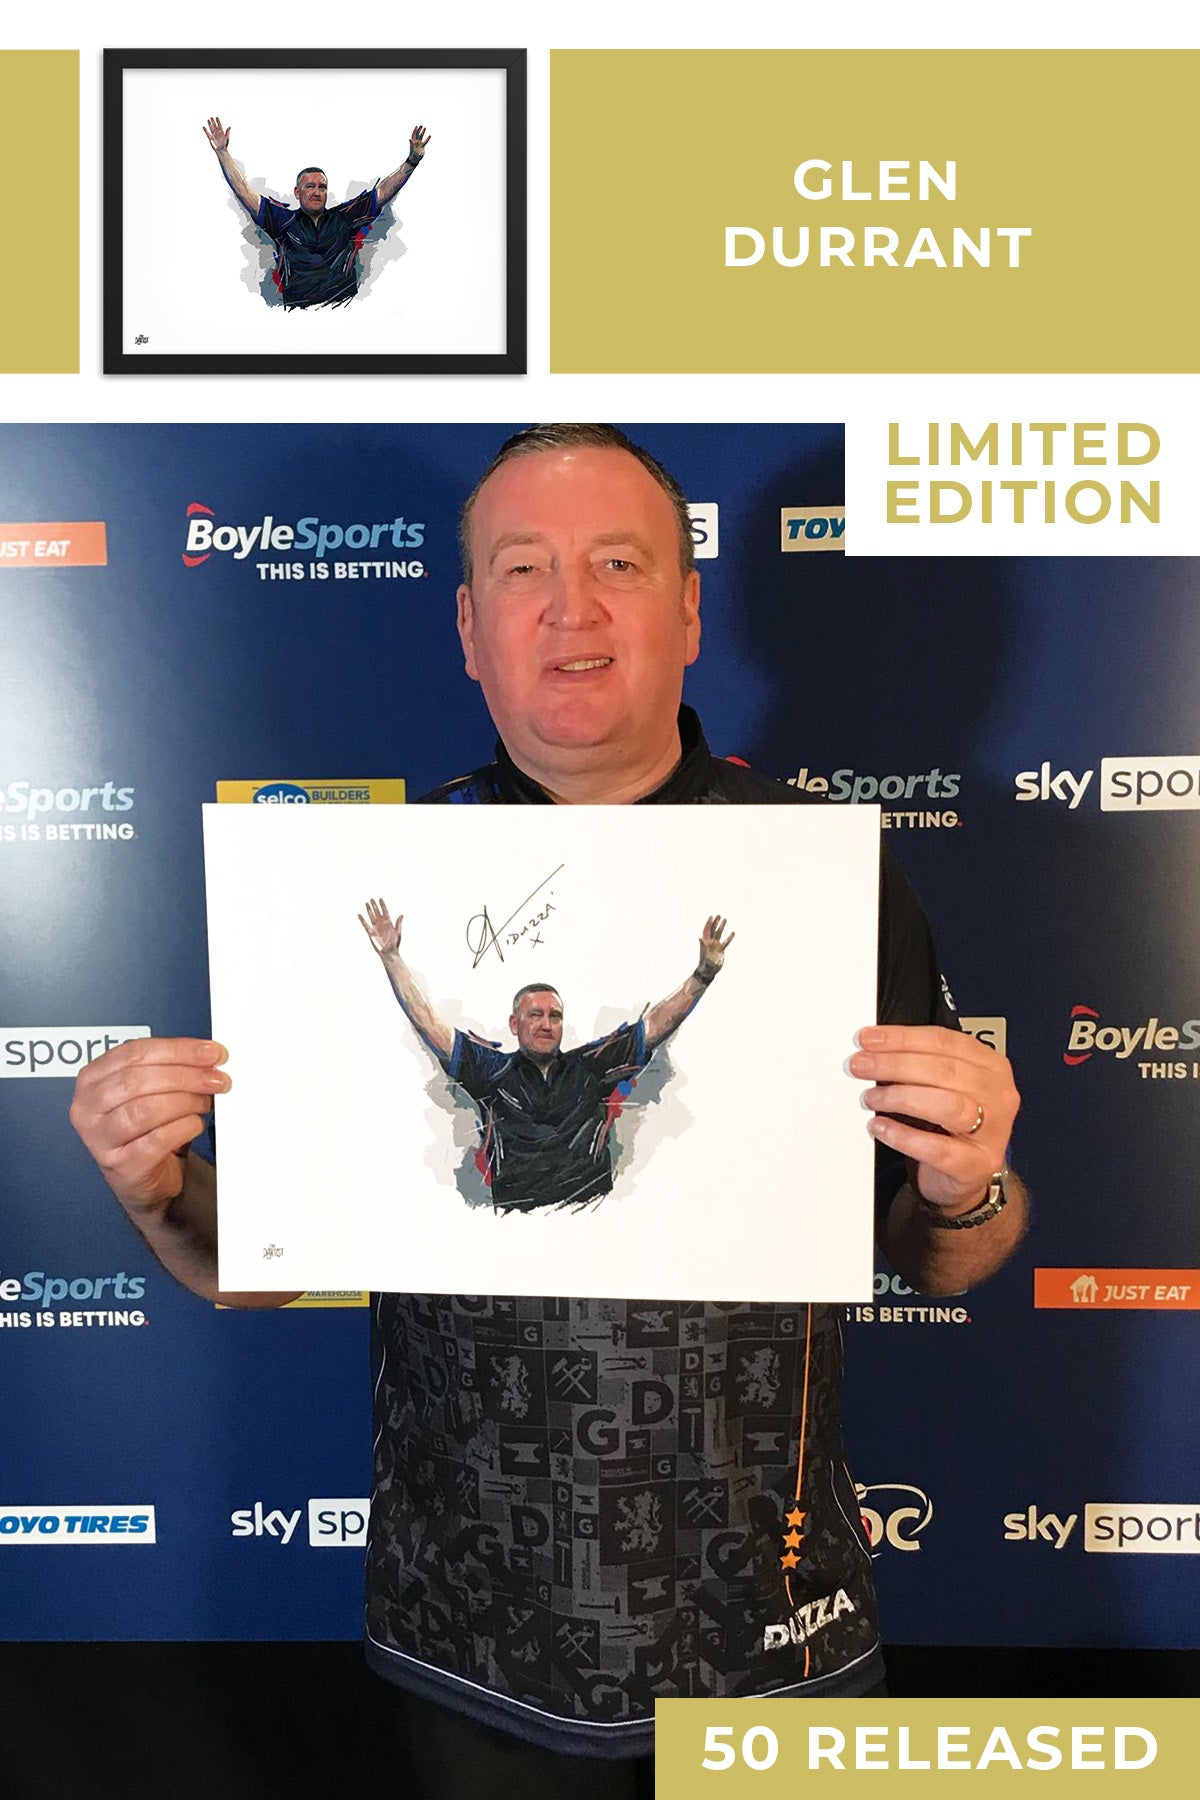 Glen Durrant Limited Edition Signed Art Print - The Dartist